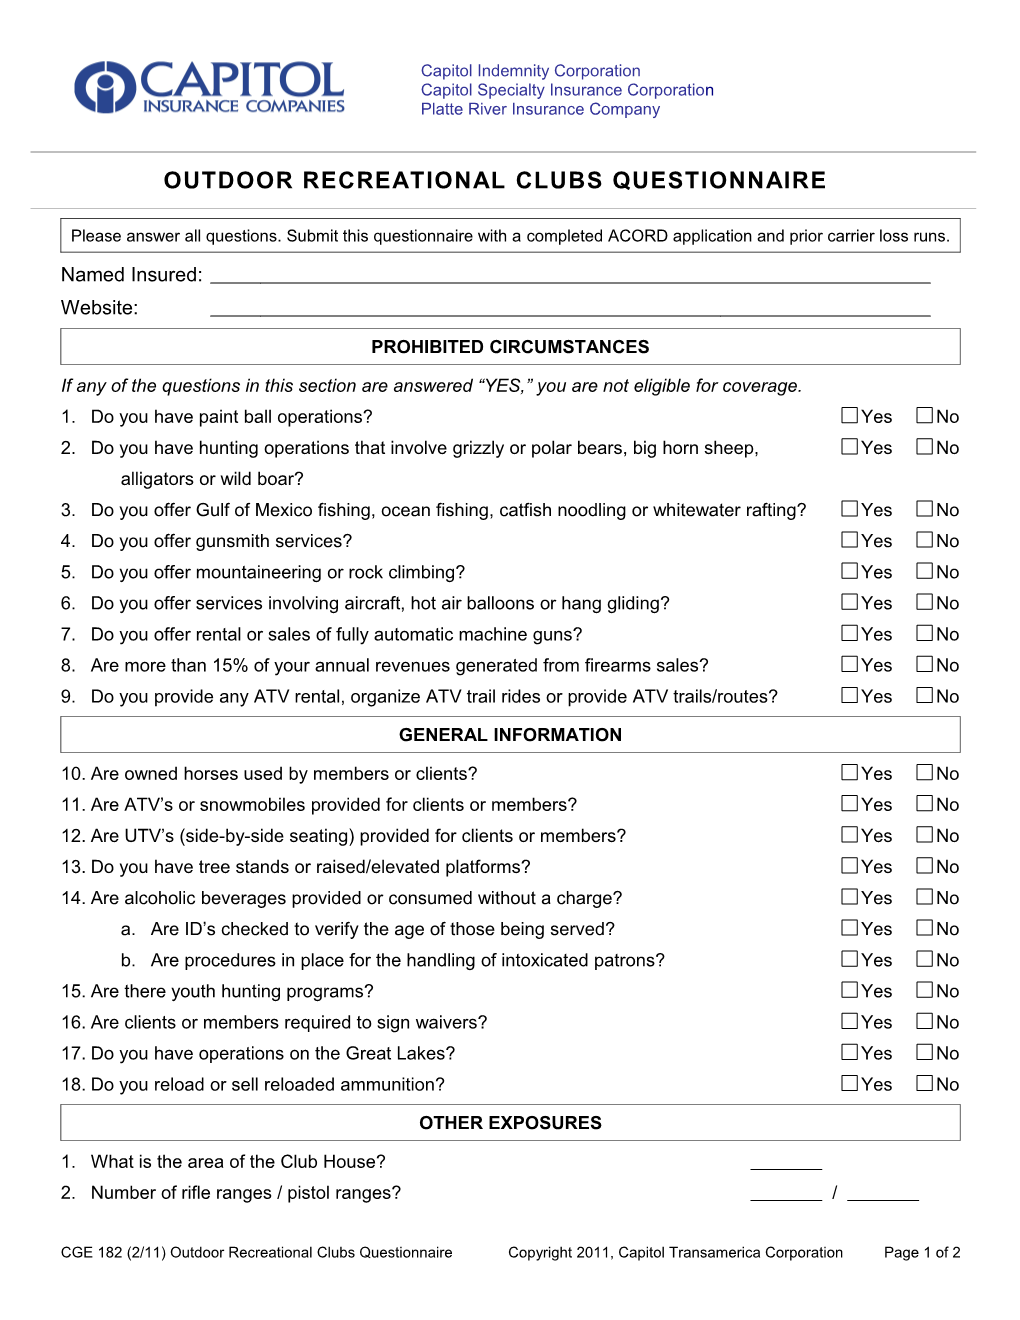 Questionnaire - Health and Exercise Clubs s1